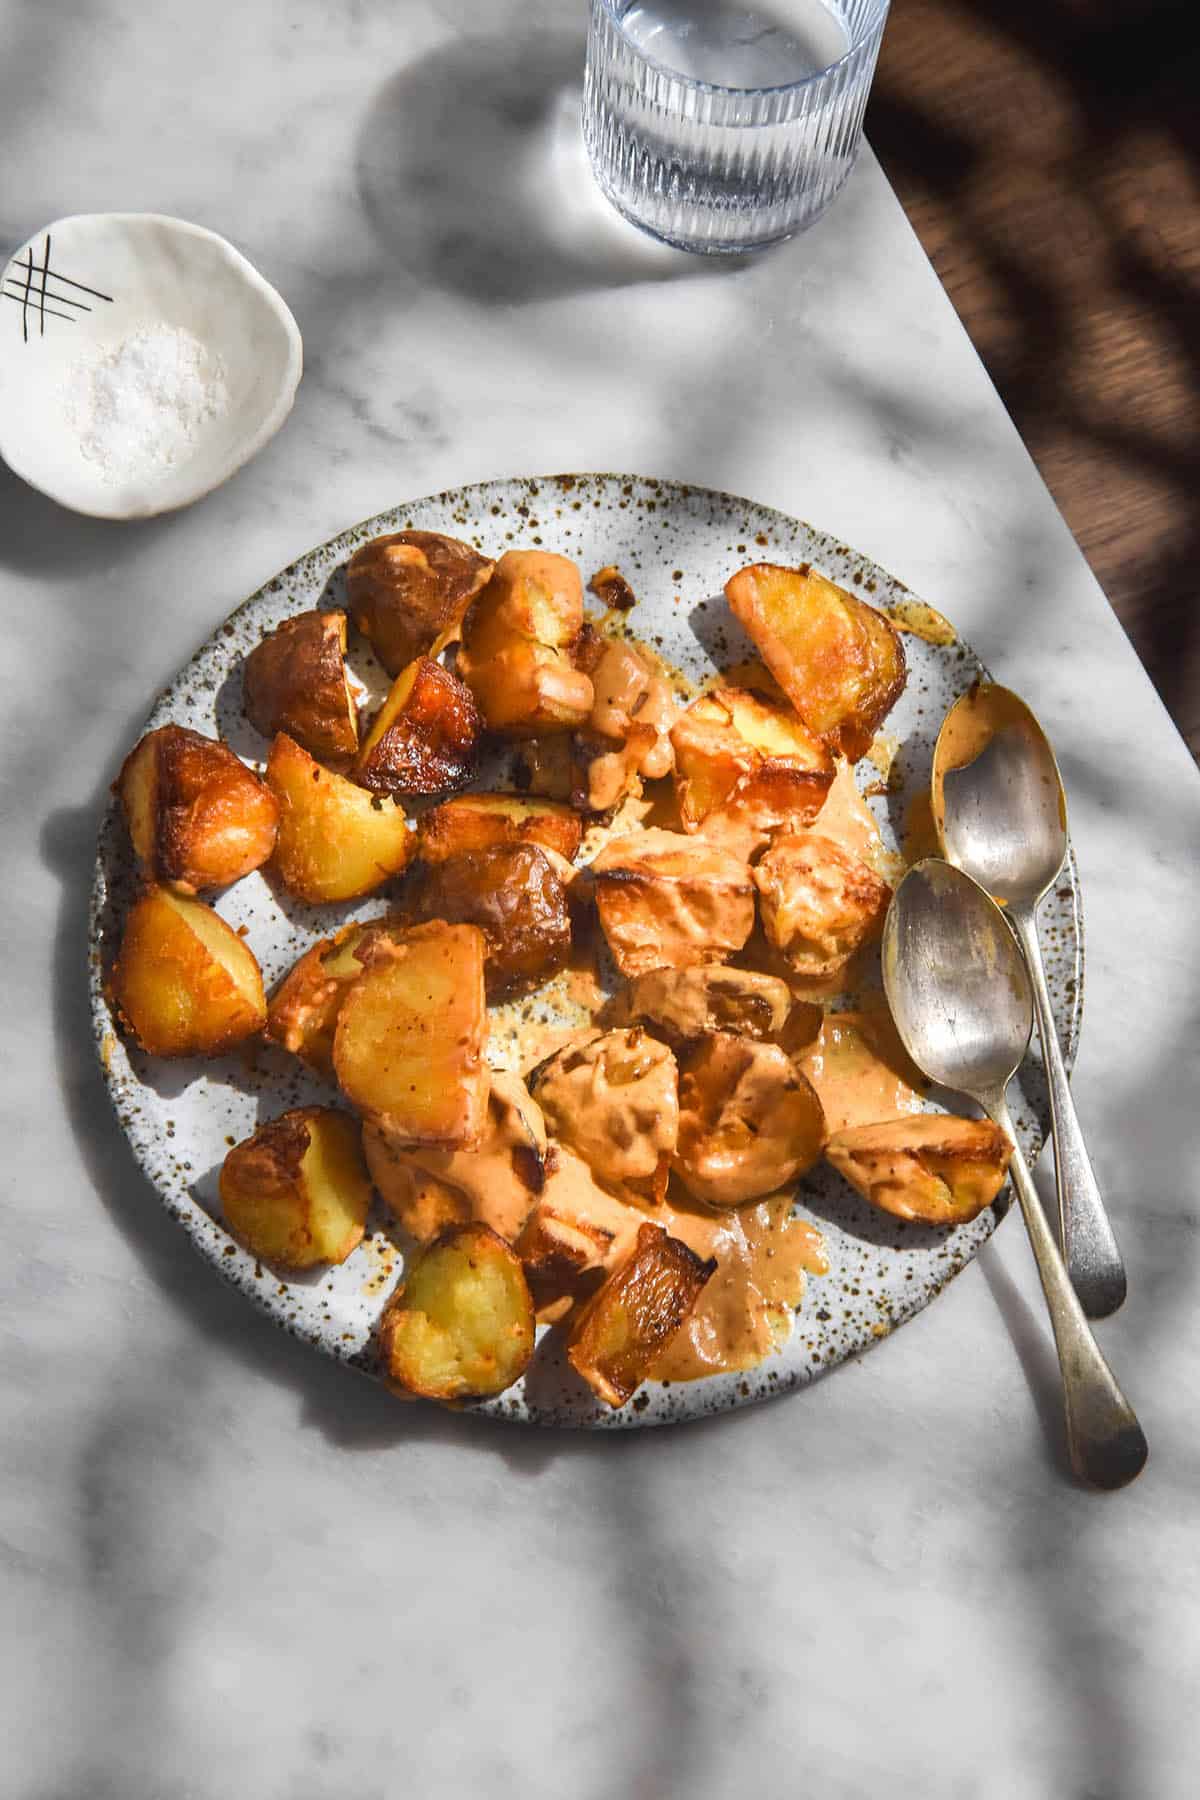 An aerial image of crispy potatoes smothered in a smoky orange tahini sauce. The potatoes sit on a white speckled ceramic plate against a white marble table in dappled light. 